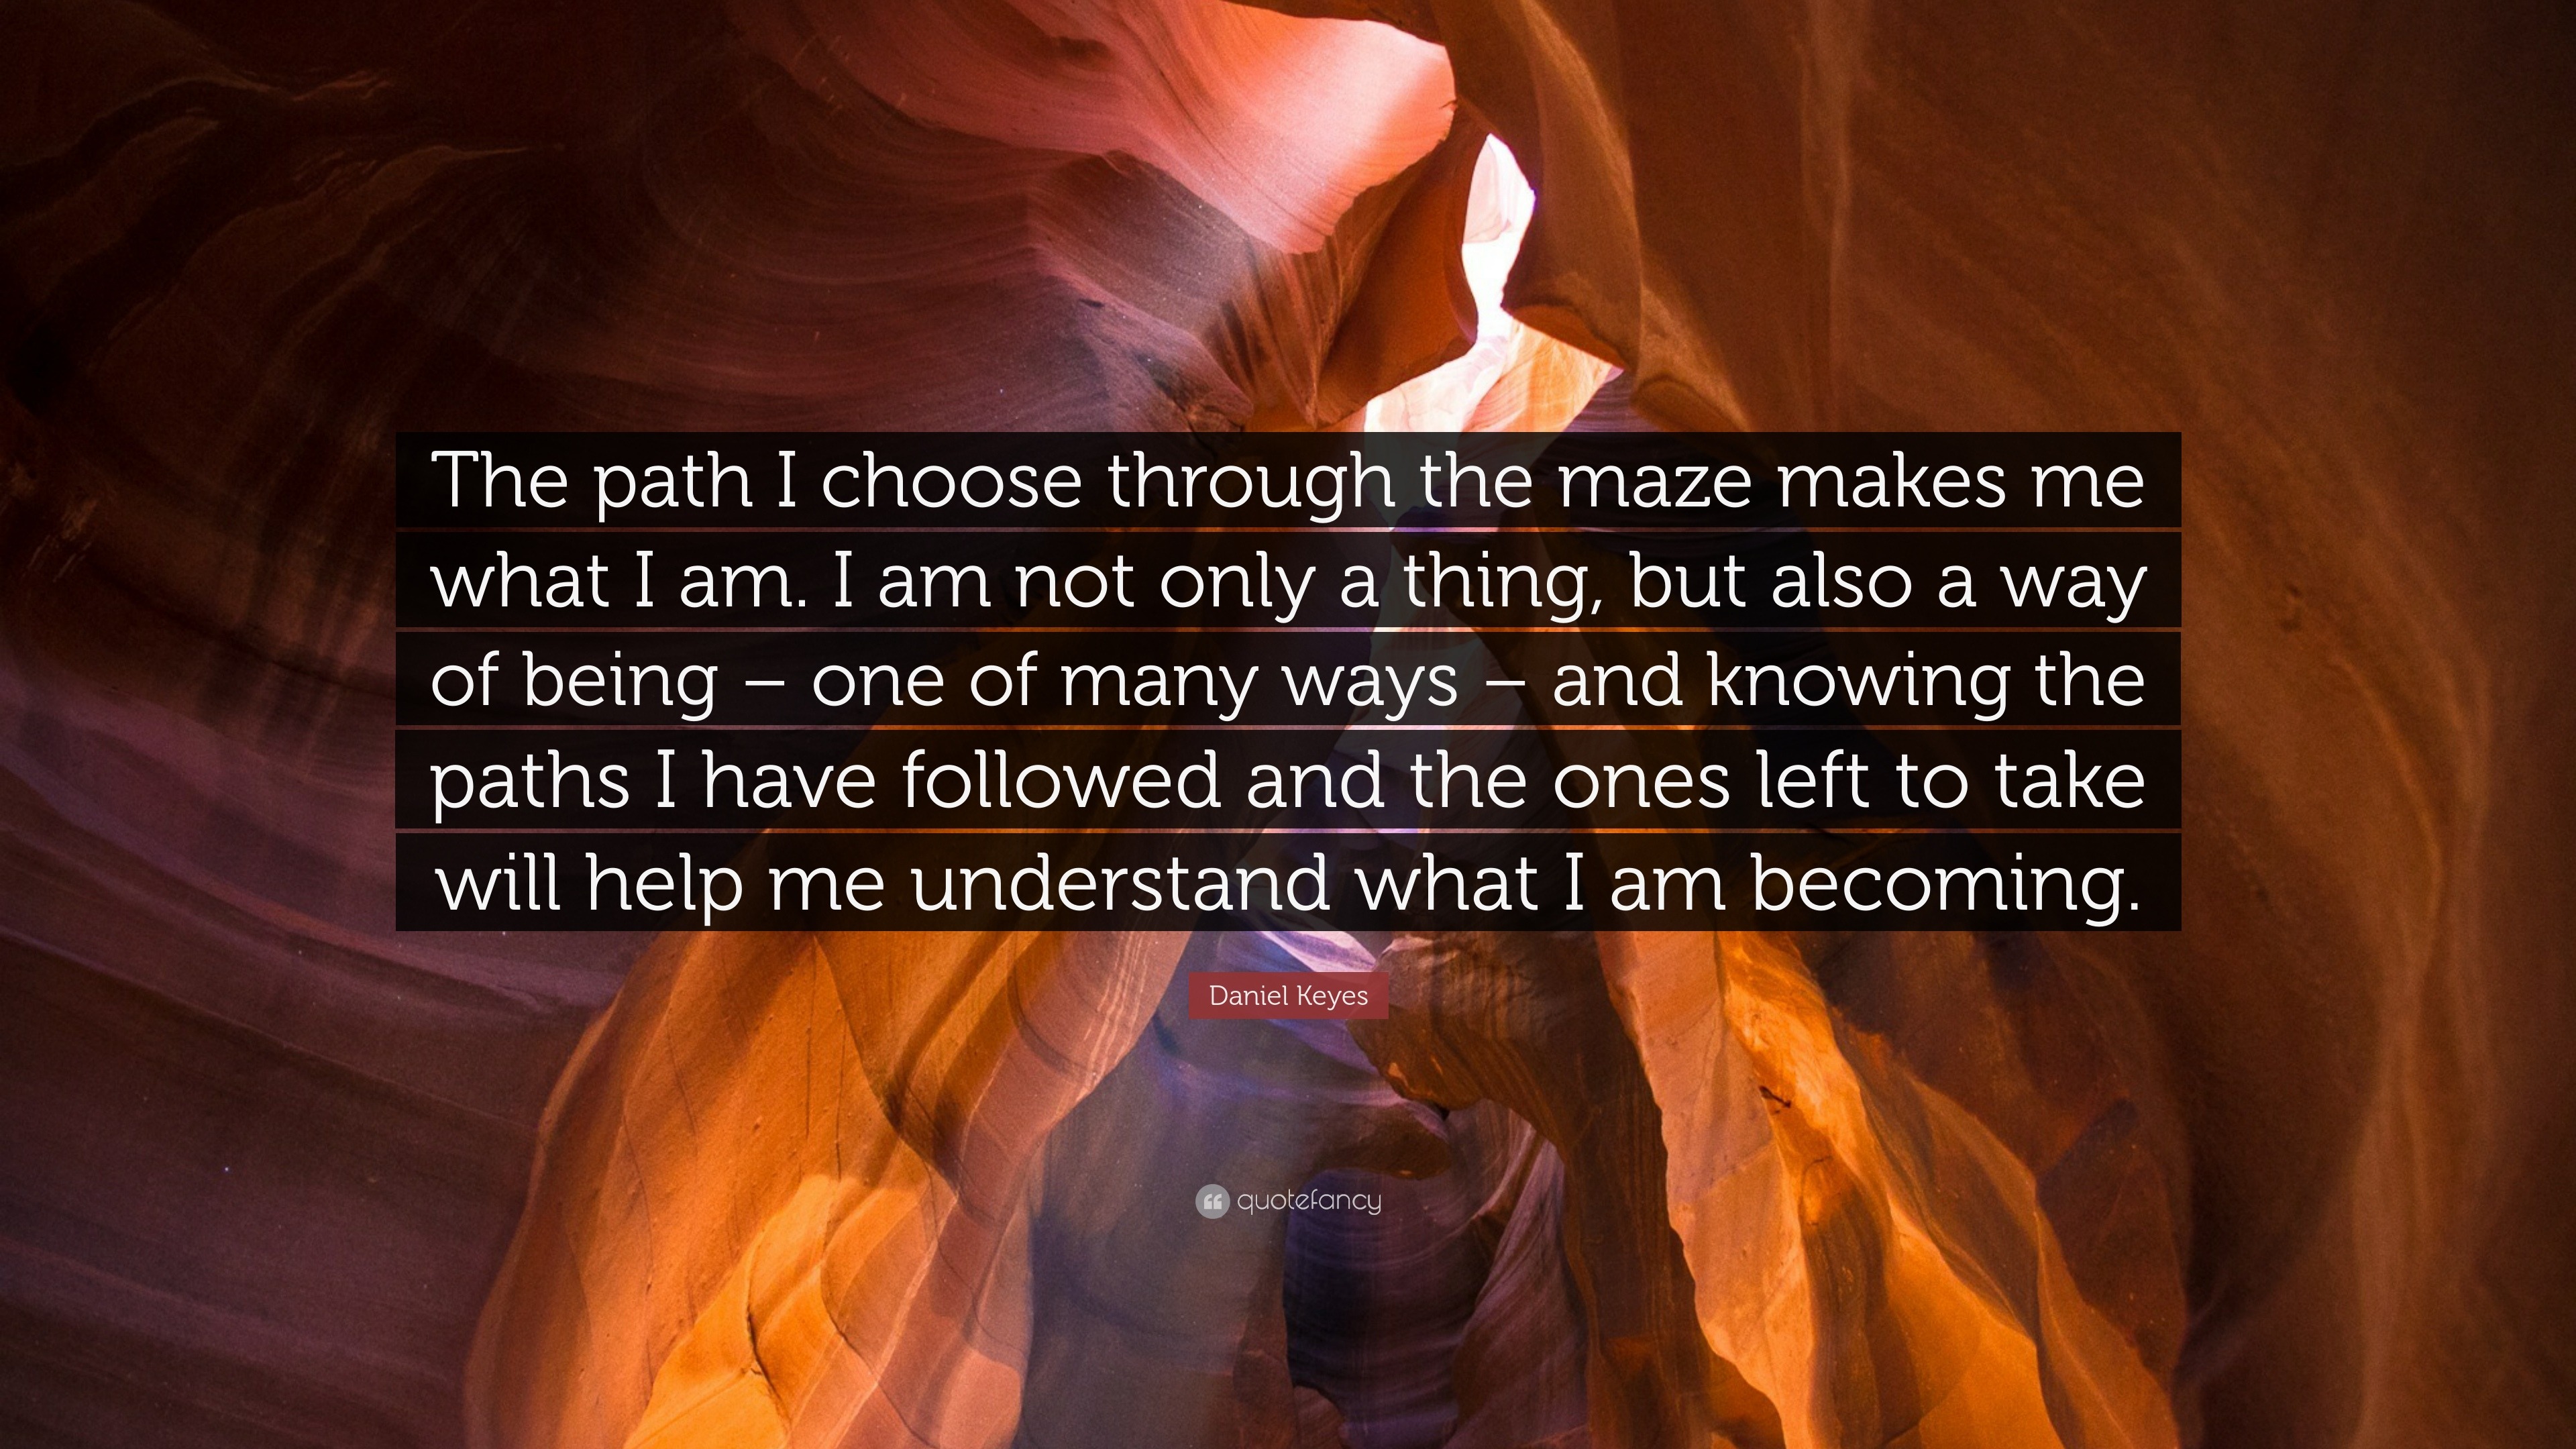 Daniel Keyes Quote The Path I Choose Through The Maze Makes Me Images, Photos, Reviews